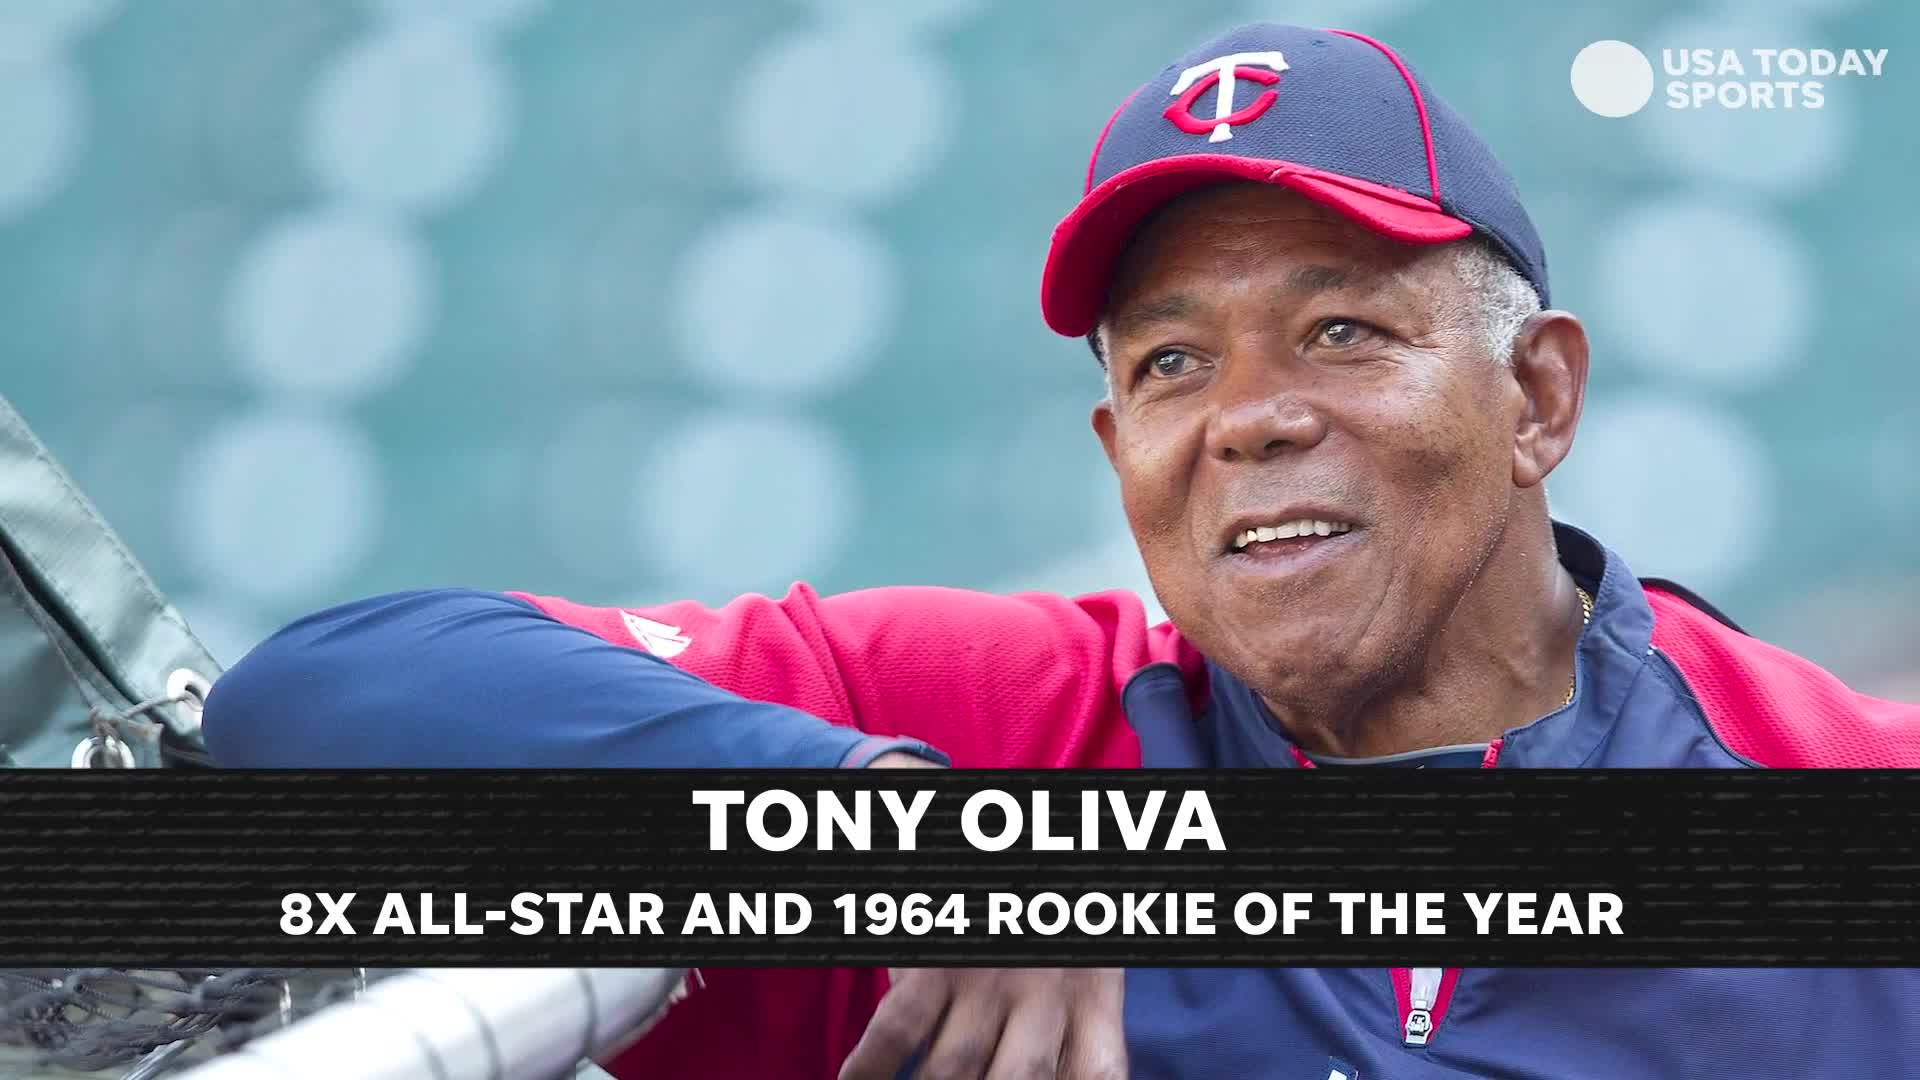 Twins great Tony Oliva to reunite with brother traveling from Cuba